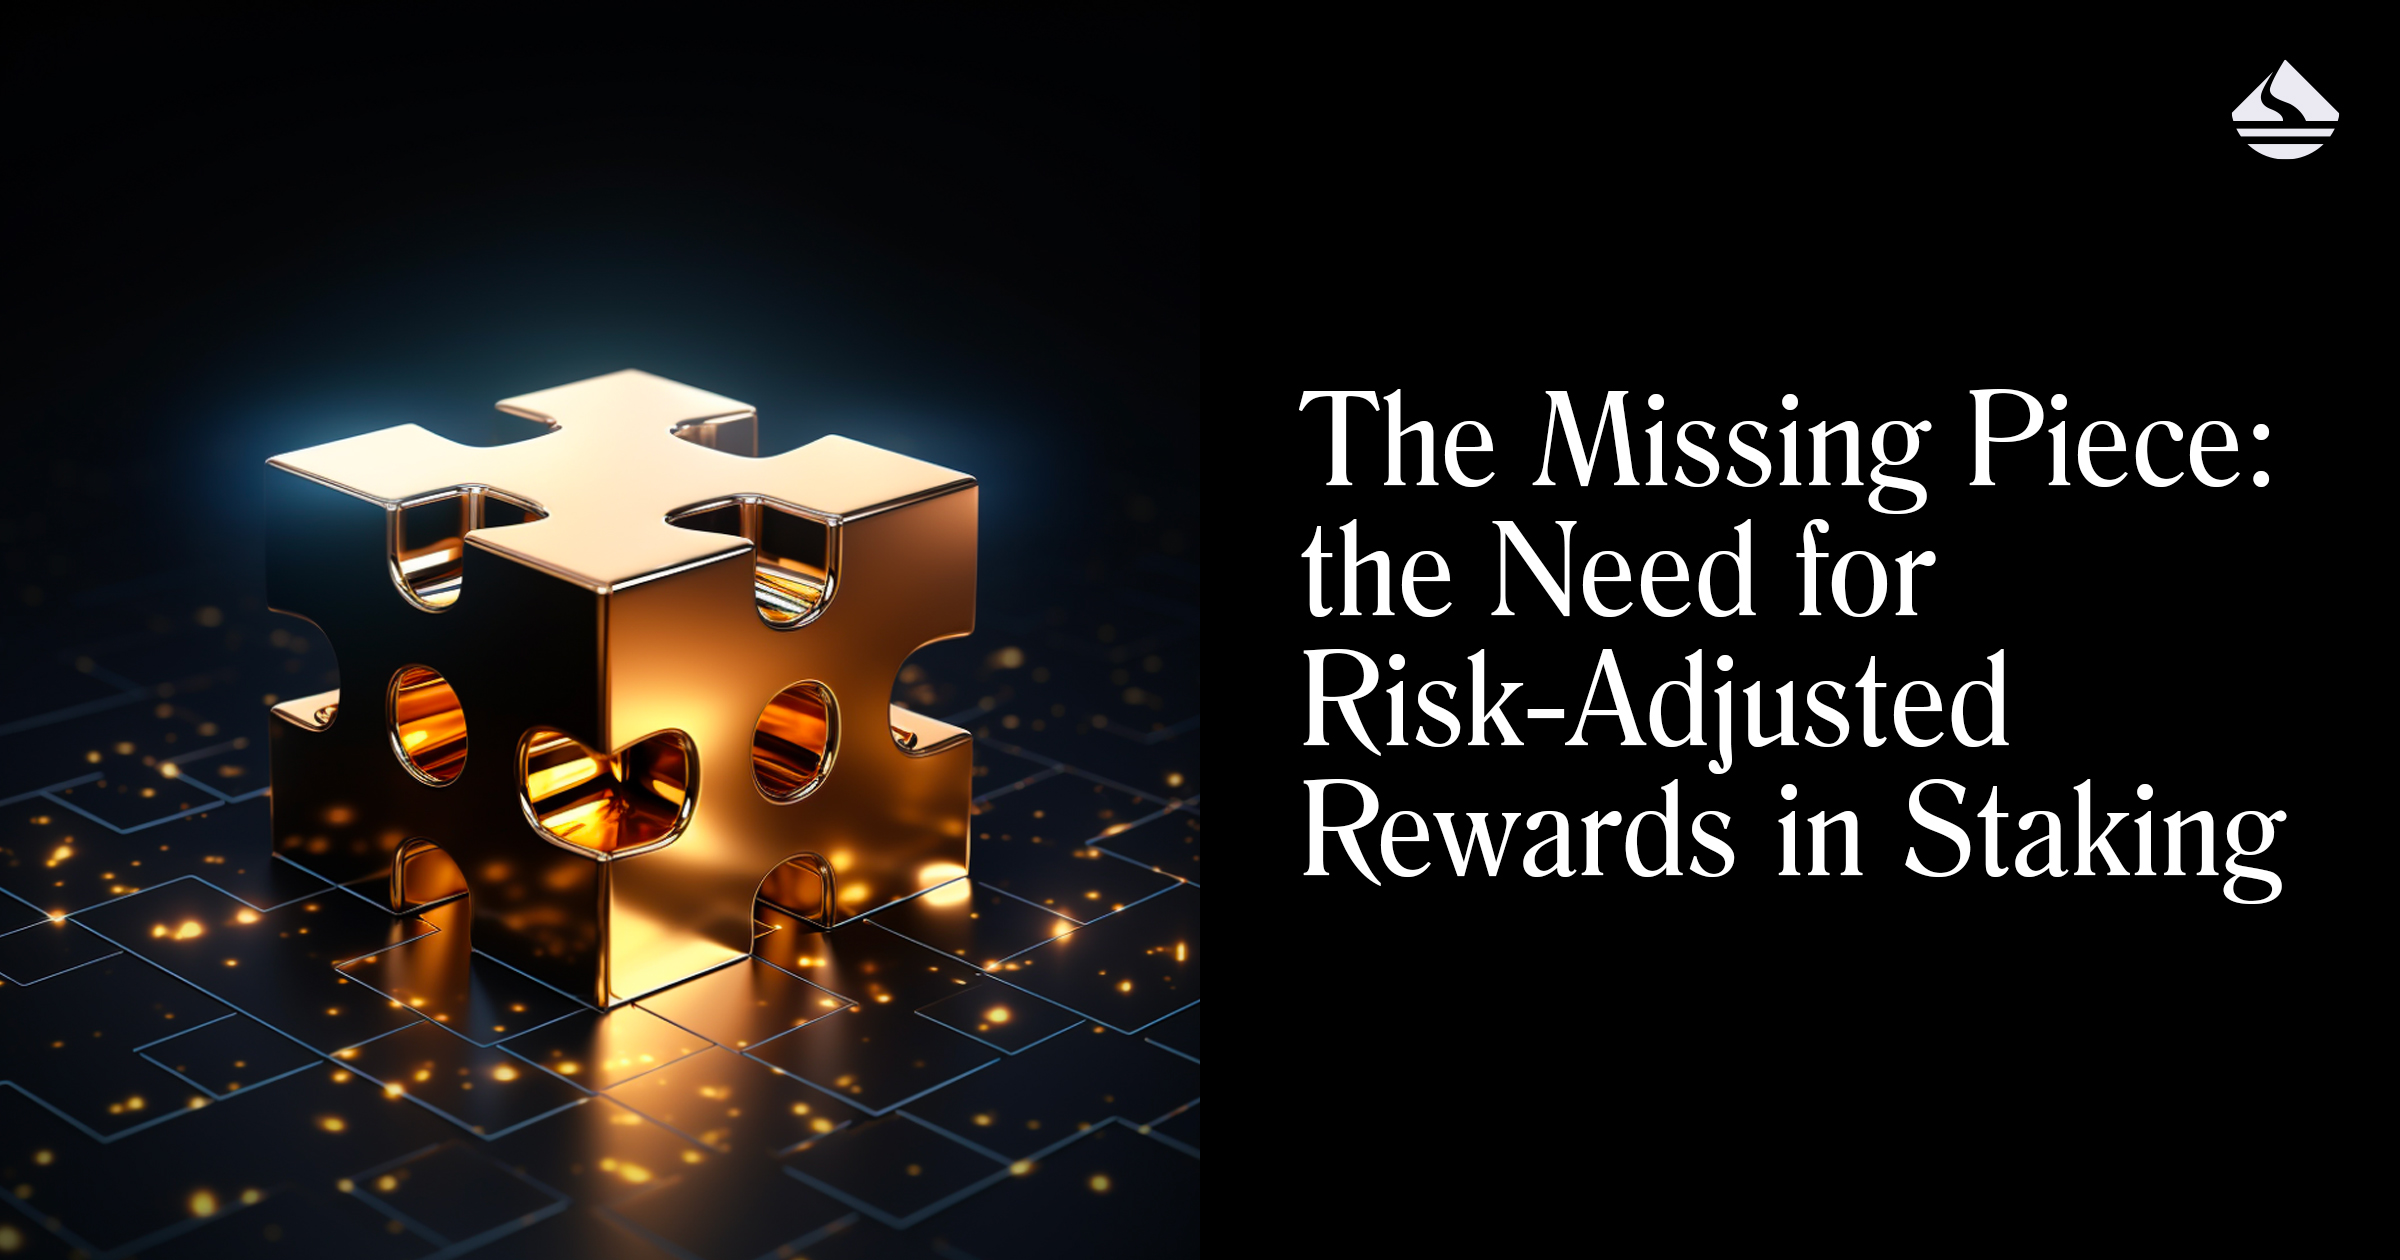 The Missing Piece: the Need for Risk-Adjusted Rewards in Staking